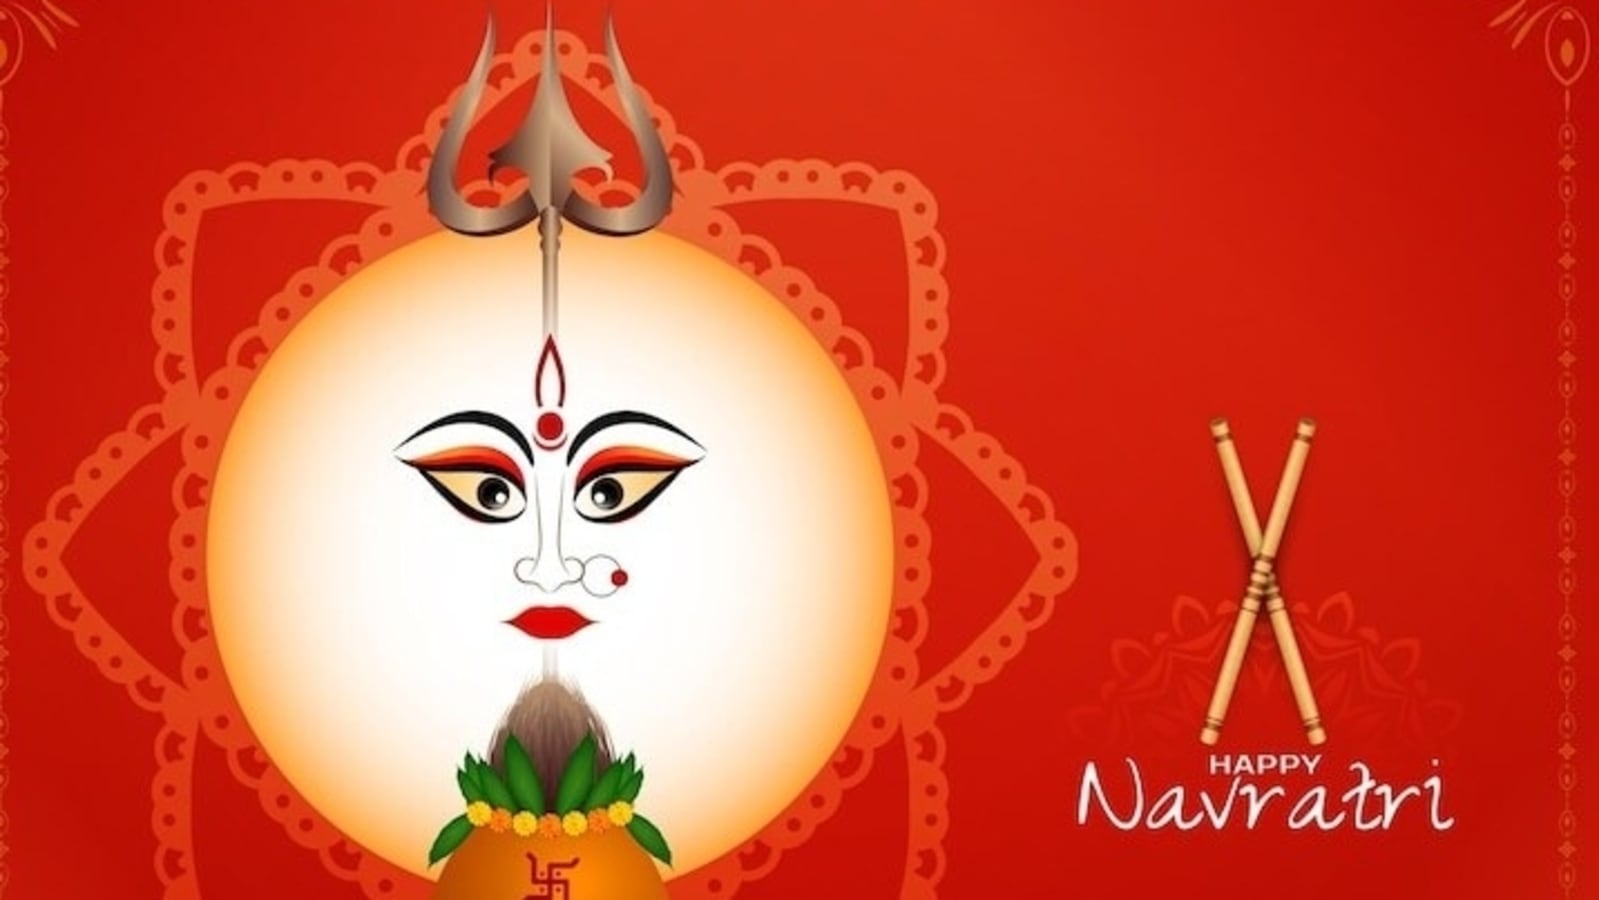 Navratri fasting tips: How to plan healthy meals to stay energised ...